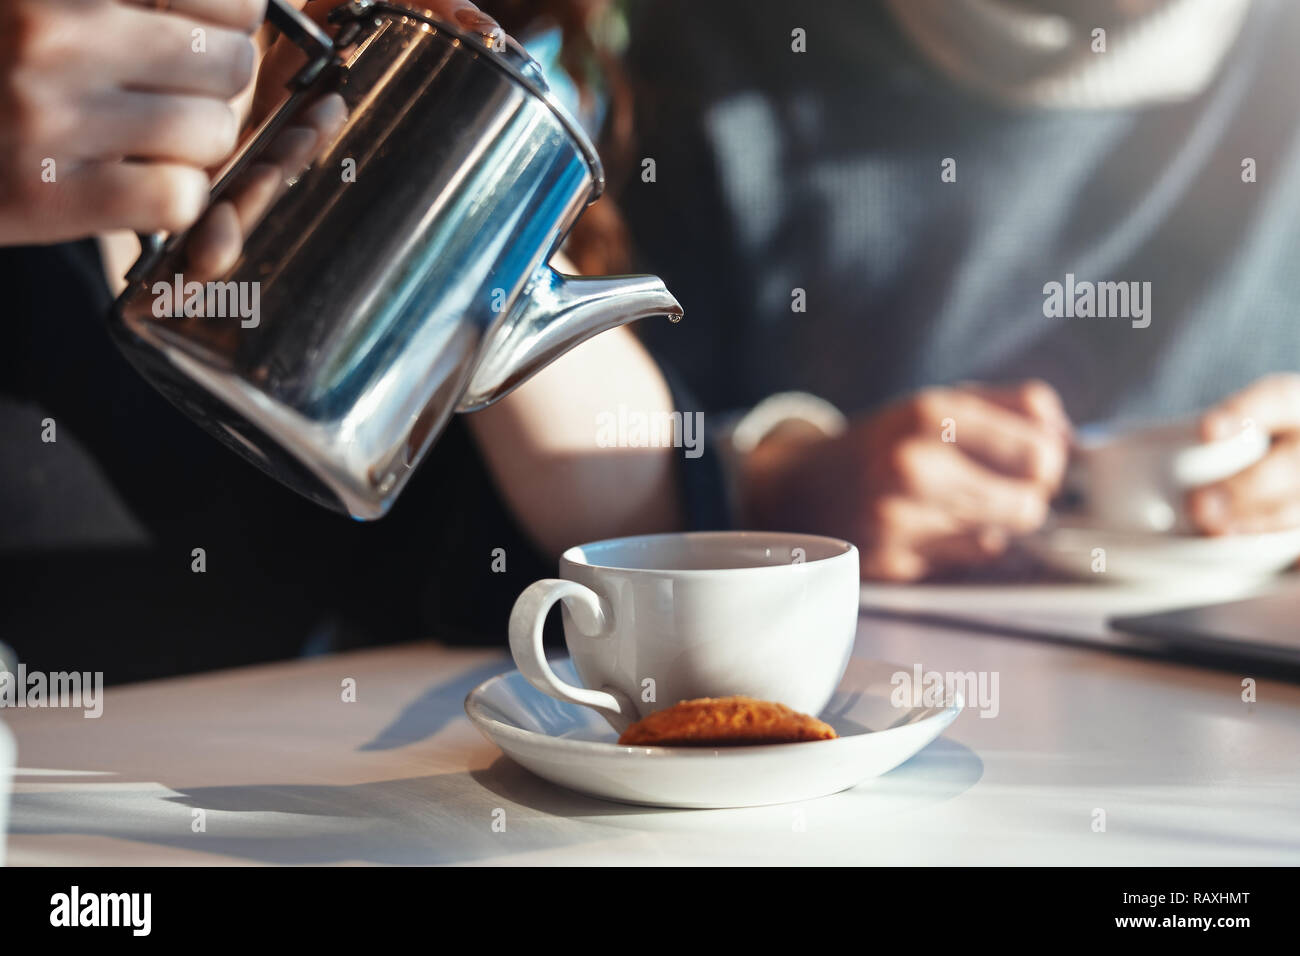 Metal teapot, cup and oat cookie on foreground. People are on background Stock Photo